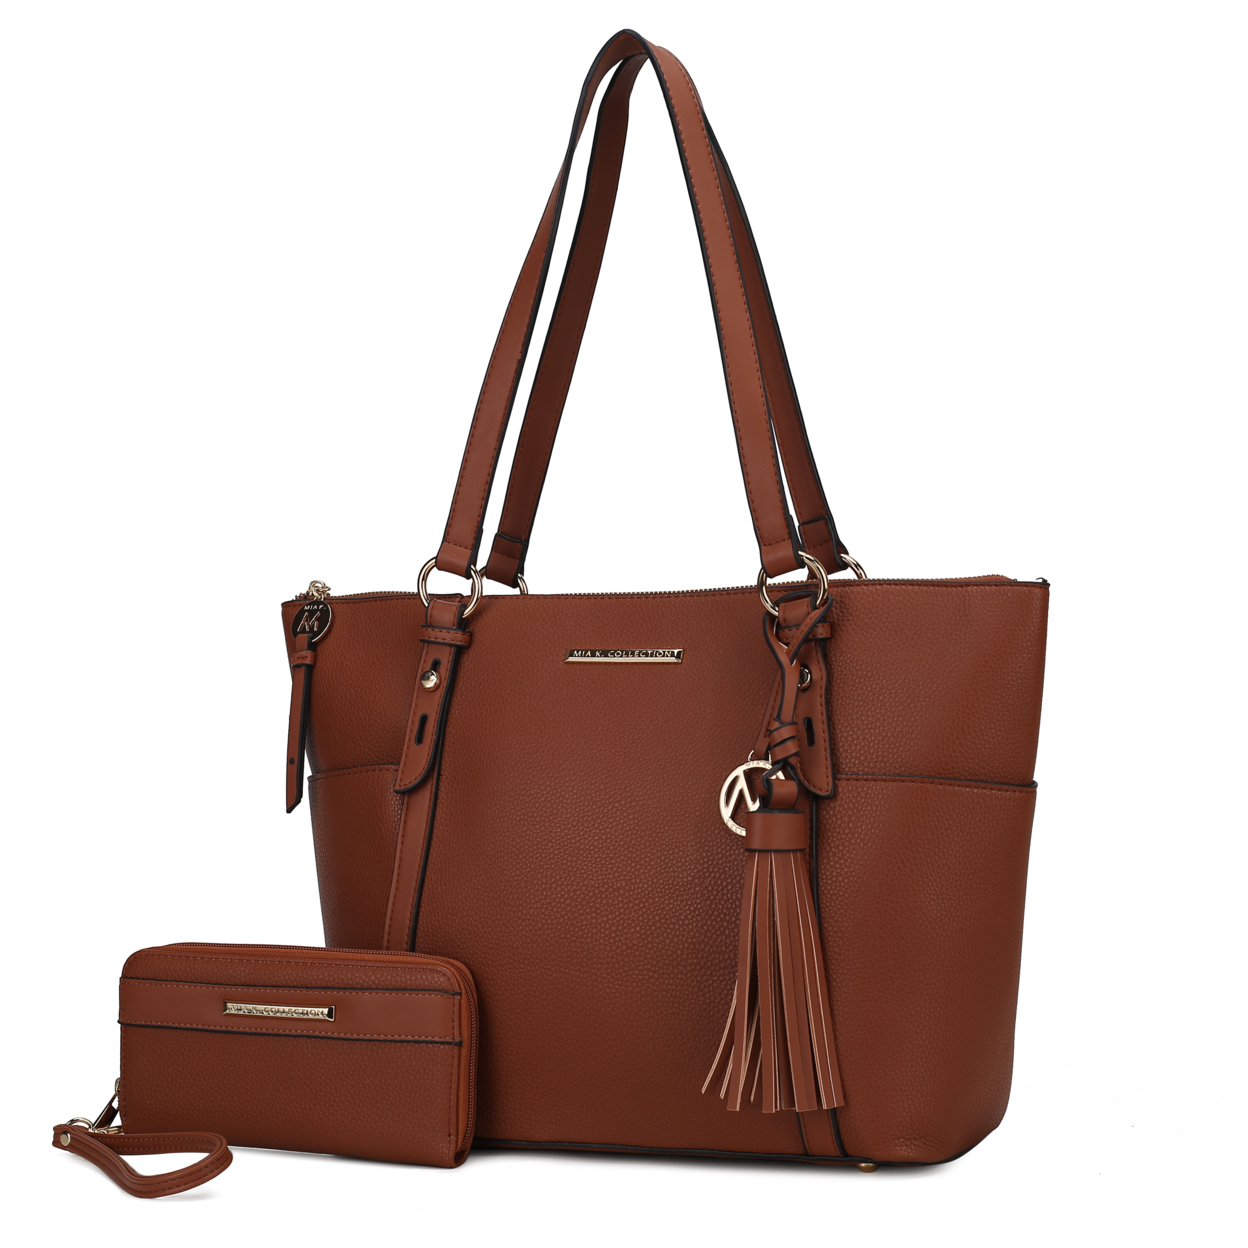 MKF Collection Gloria Vegan Leather Women's Tote Bag By Mia K With Wallet -2 Pieces - Brown